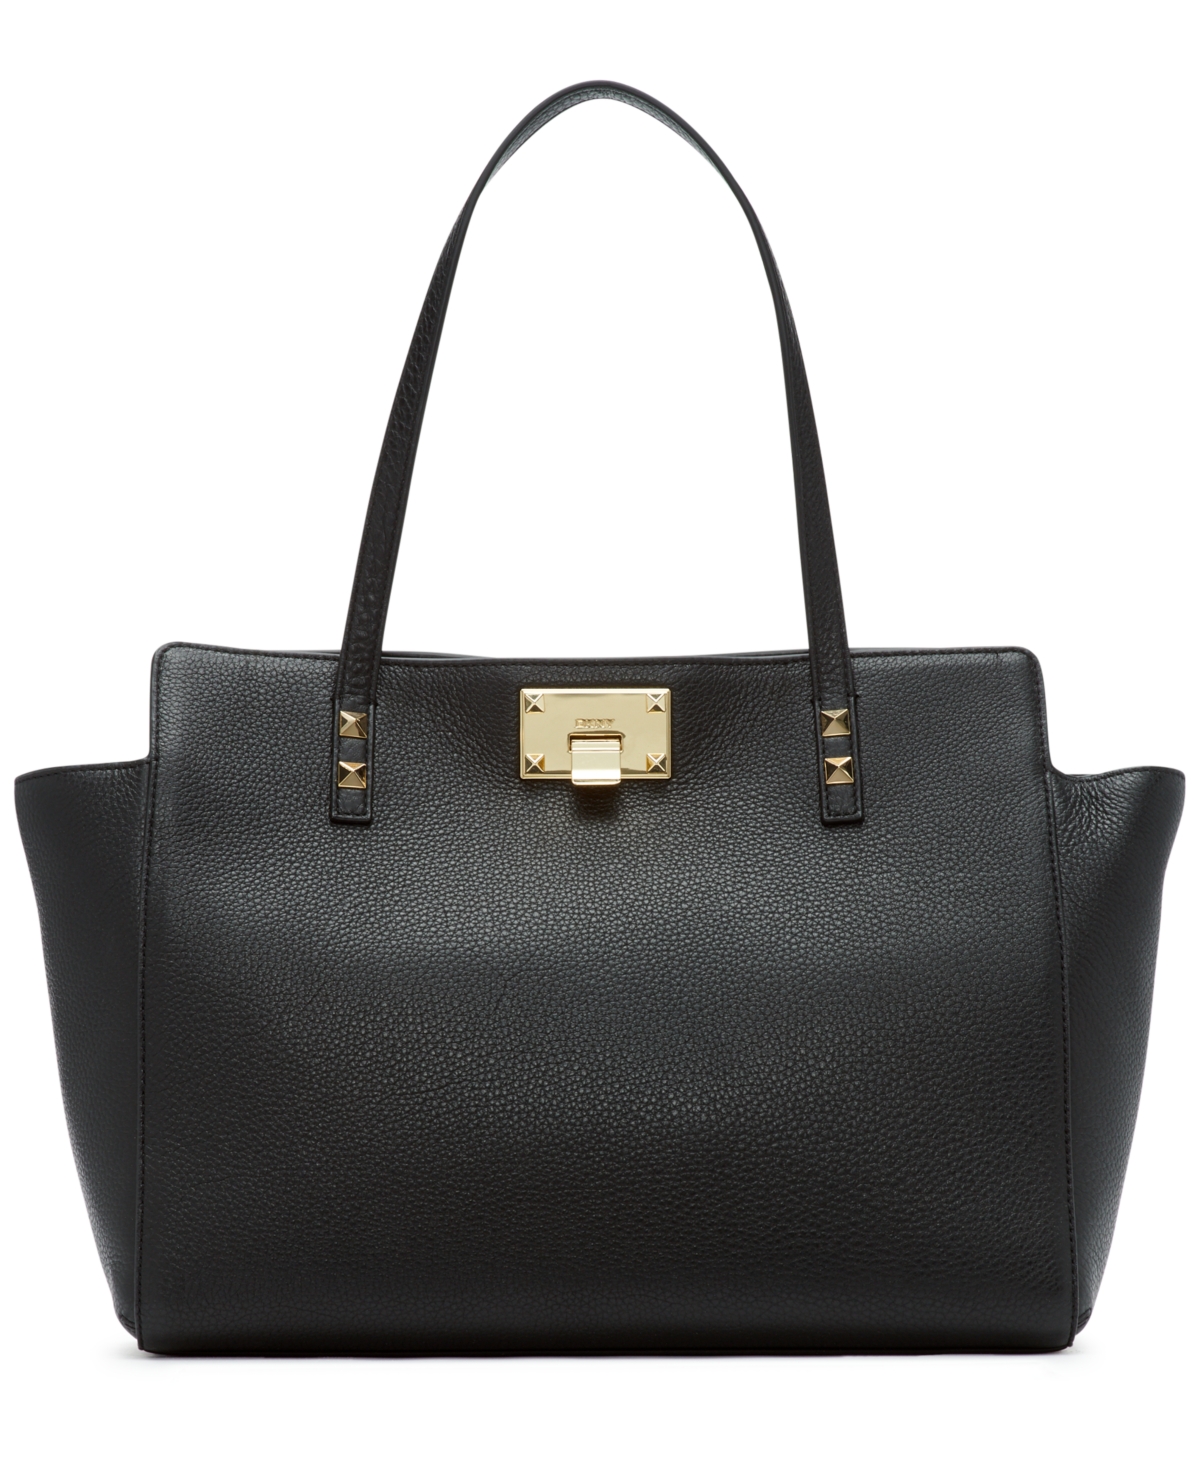 Dkny Parker Tote In Black/gold-tone | ModeSens